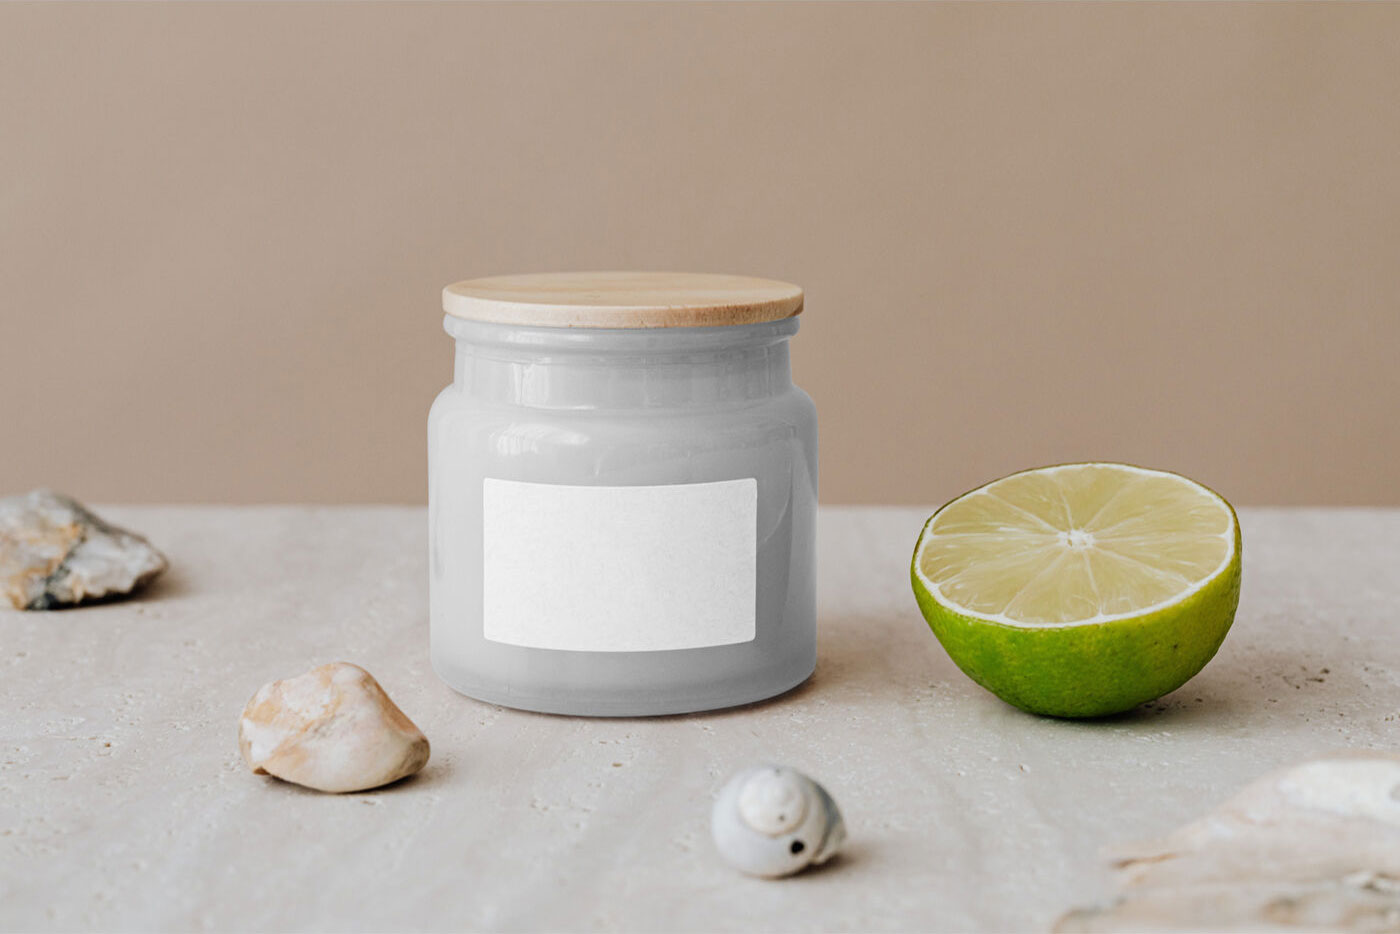 Front View of a Porcelaine Cosmetics Bath Jar Mockup FREE PSD